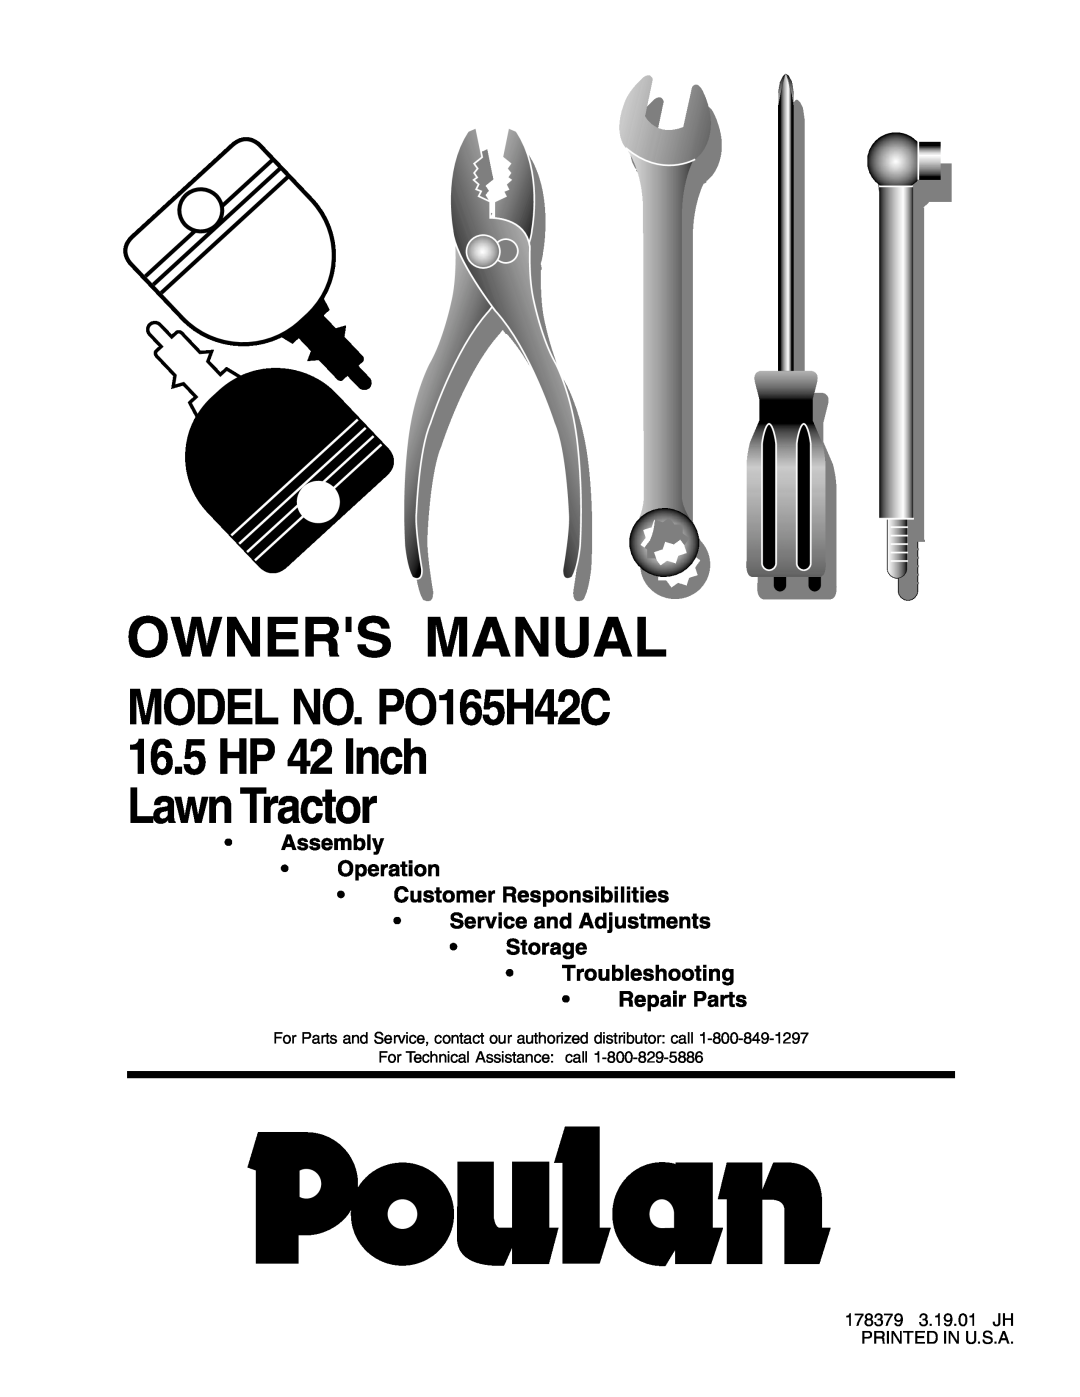 Poulan 178379 owner manual Owners Manual, MODEL NO. PO165H42C 16.5 HP 42 Inch Lawn Tractor 